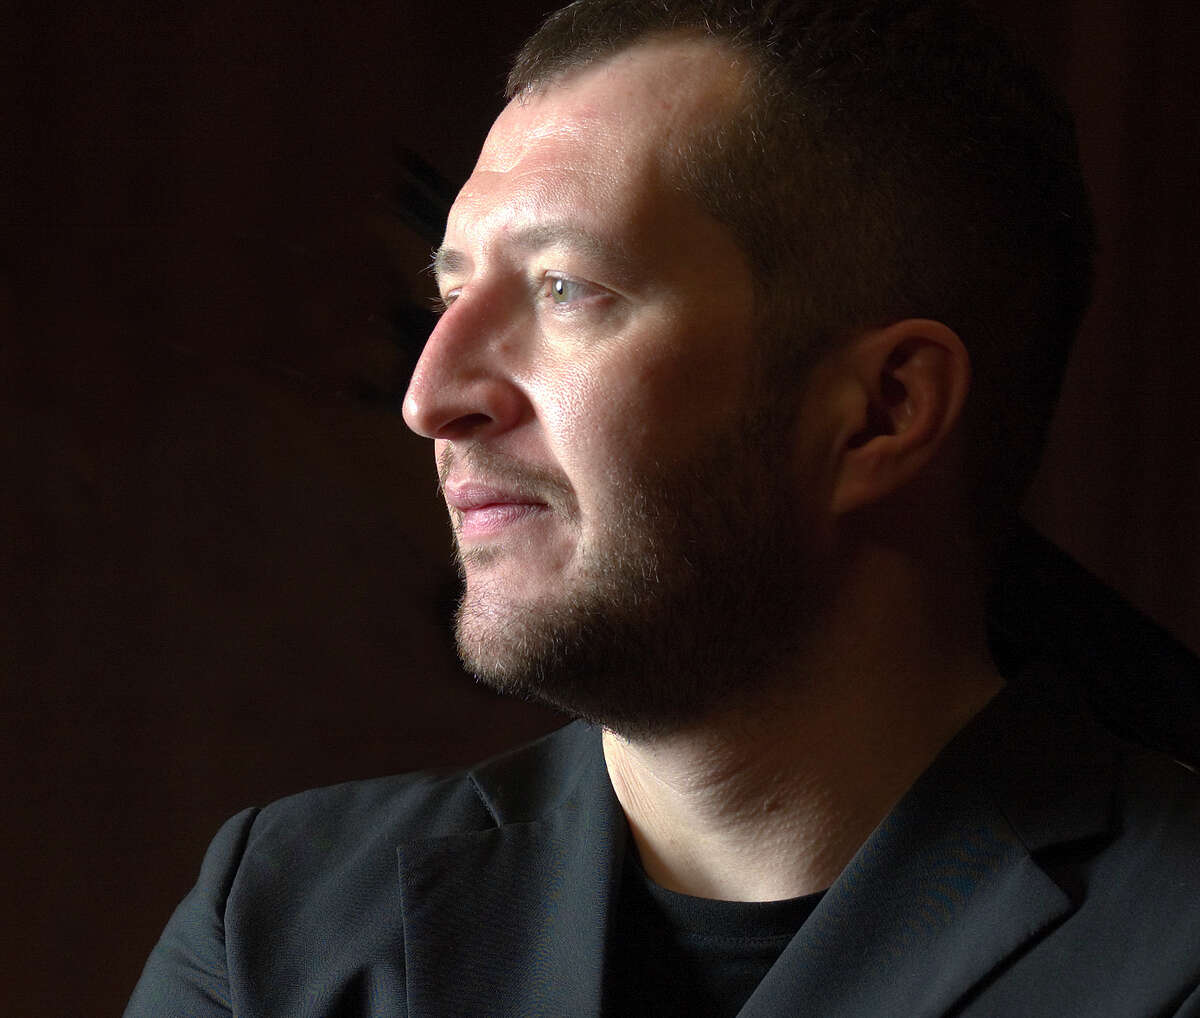 Composer Thomas Adès will make his conducting debut in the San Francisco Symphony with the beautifully mysterious, creation-themed piece “In Seven Days” on Thursday, March 5.